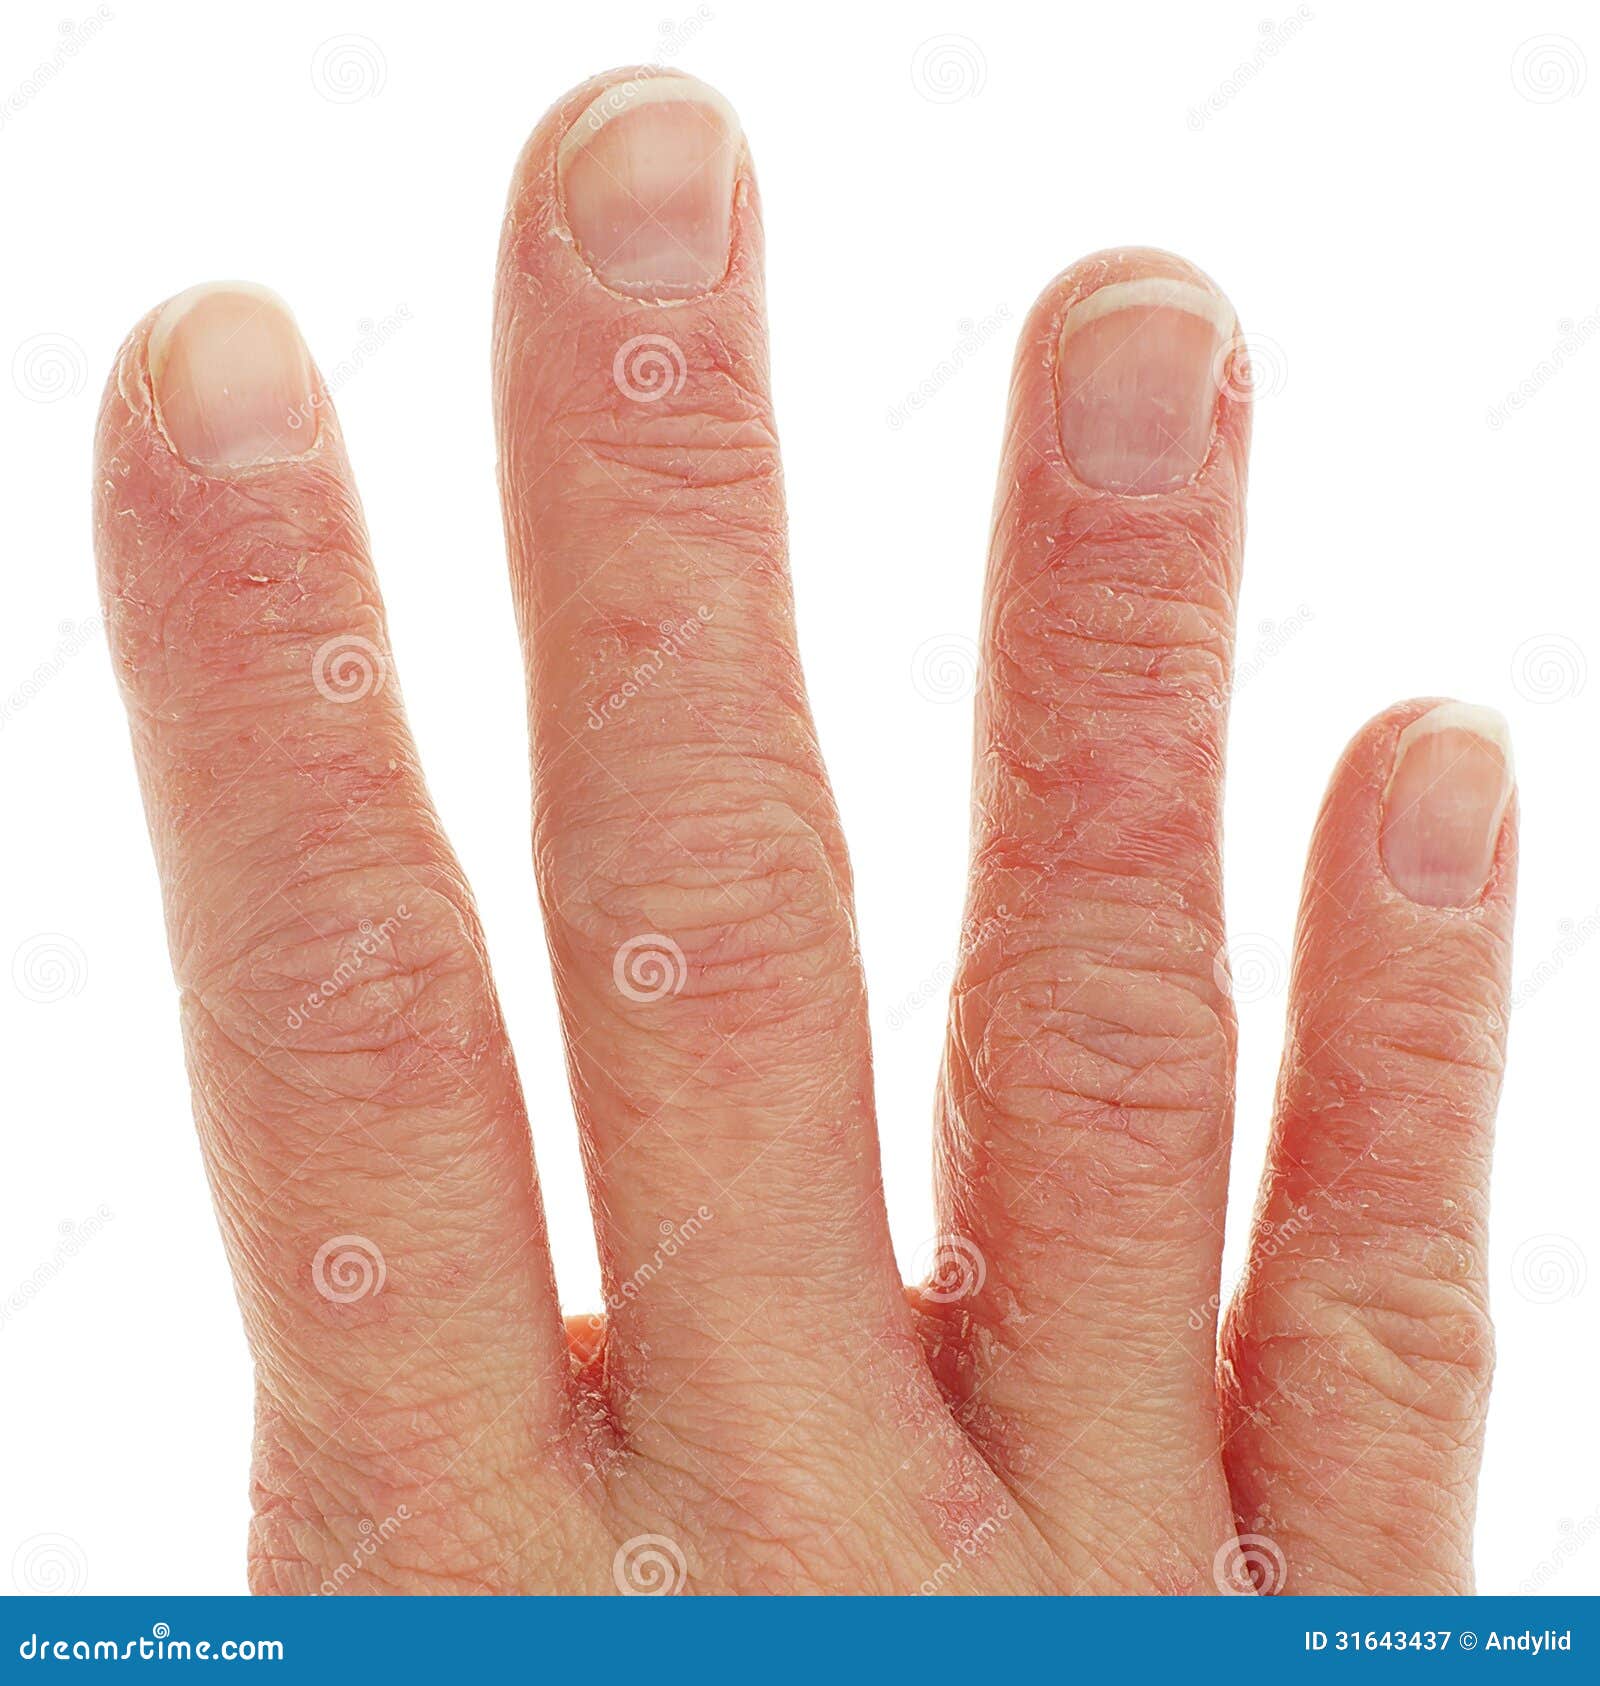 Eczema: Caring for Your Hands and Feet - WebMD